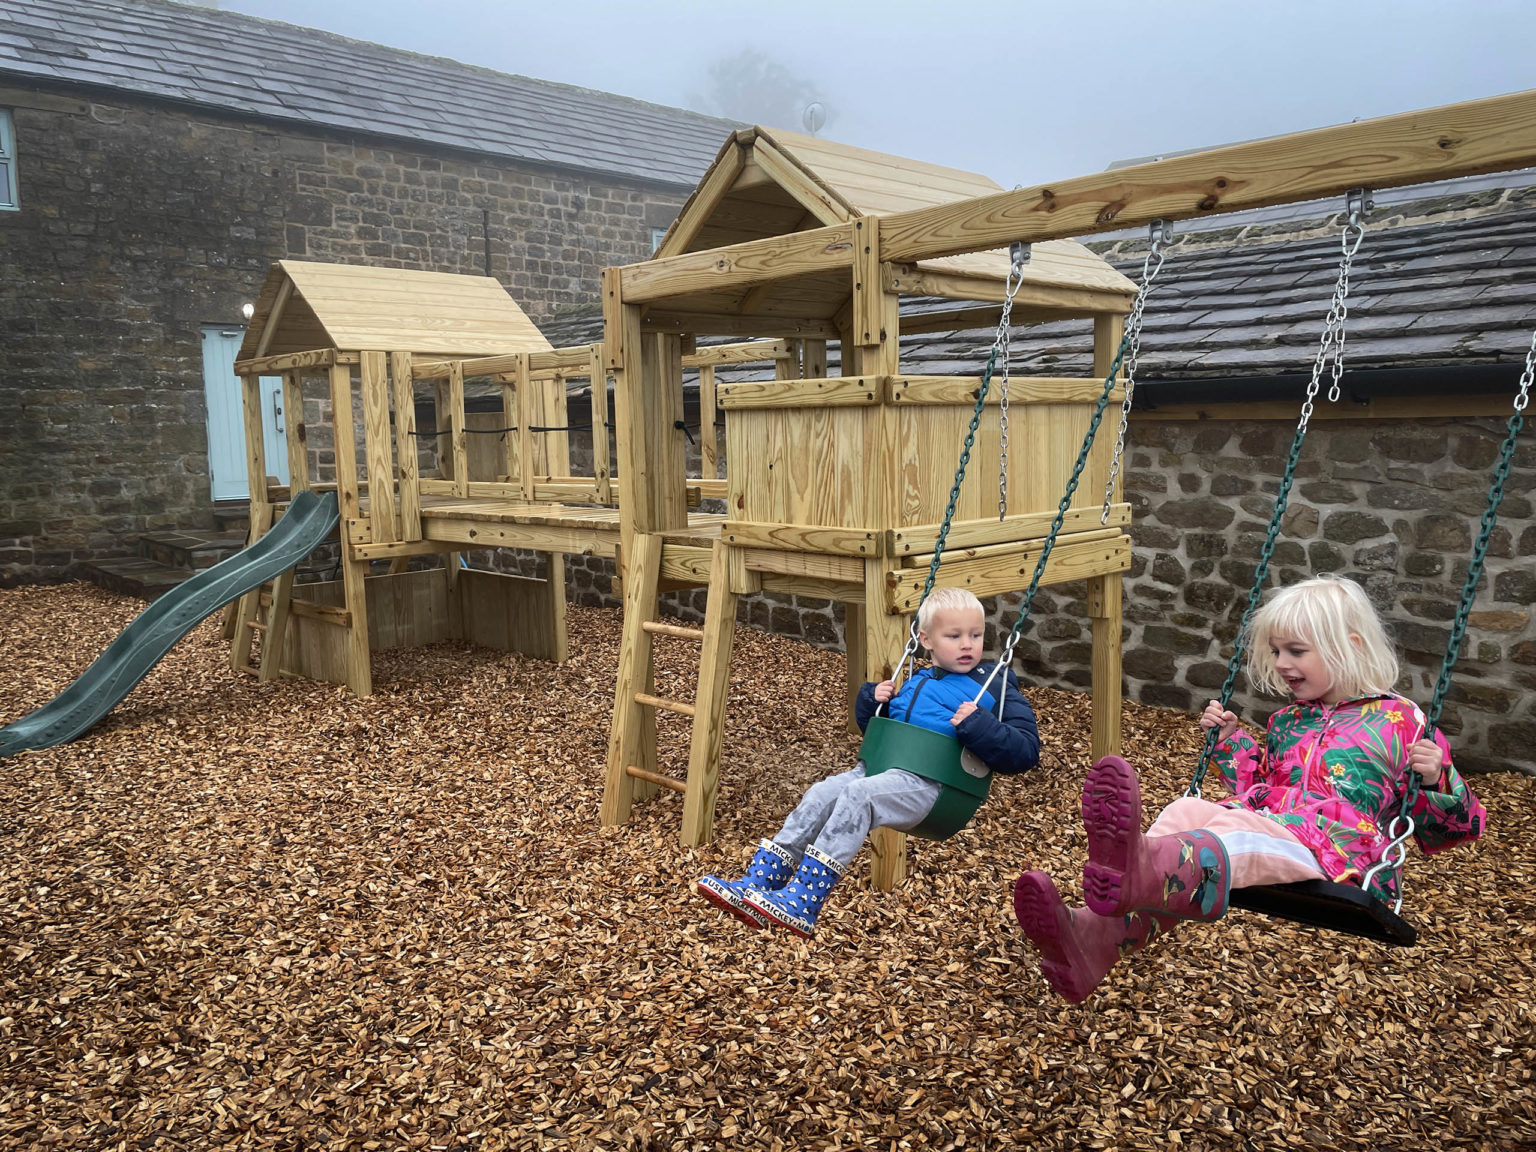 Two young children wearing coats playing on swings at the Swinton Bivouac play area near Masham